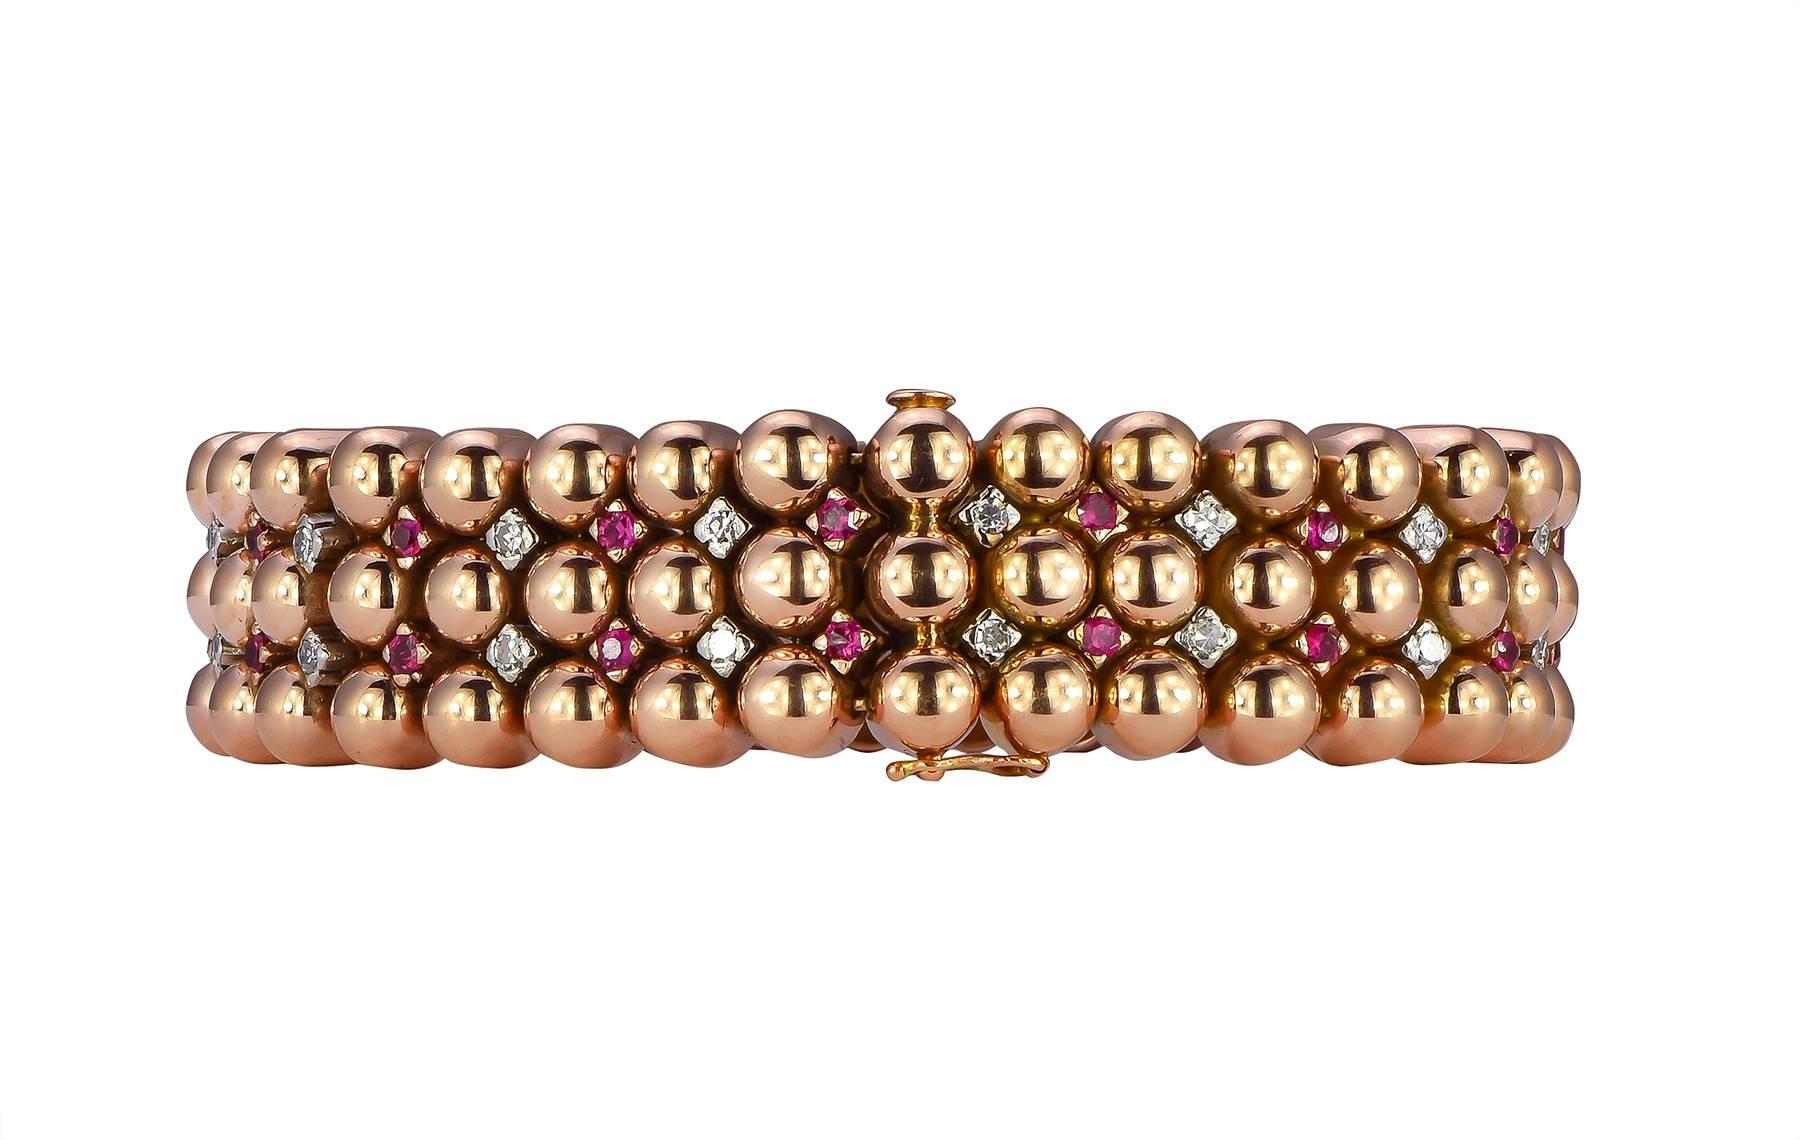 Retro ruby and diamond bracelet in 18k rose gold with slide pin closure.  The 32 single cut diamonds have a total weight of 1.46cts, with the 32 rubies having a weight of 1.66cts.  The diamonds and rubies rotate every other, and are set between the